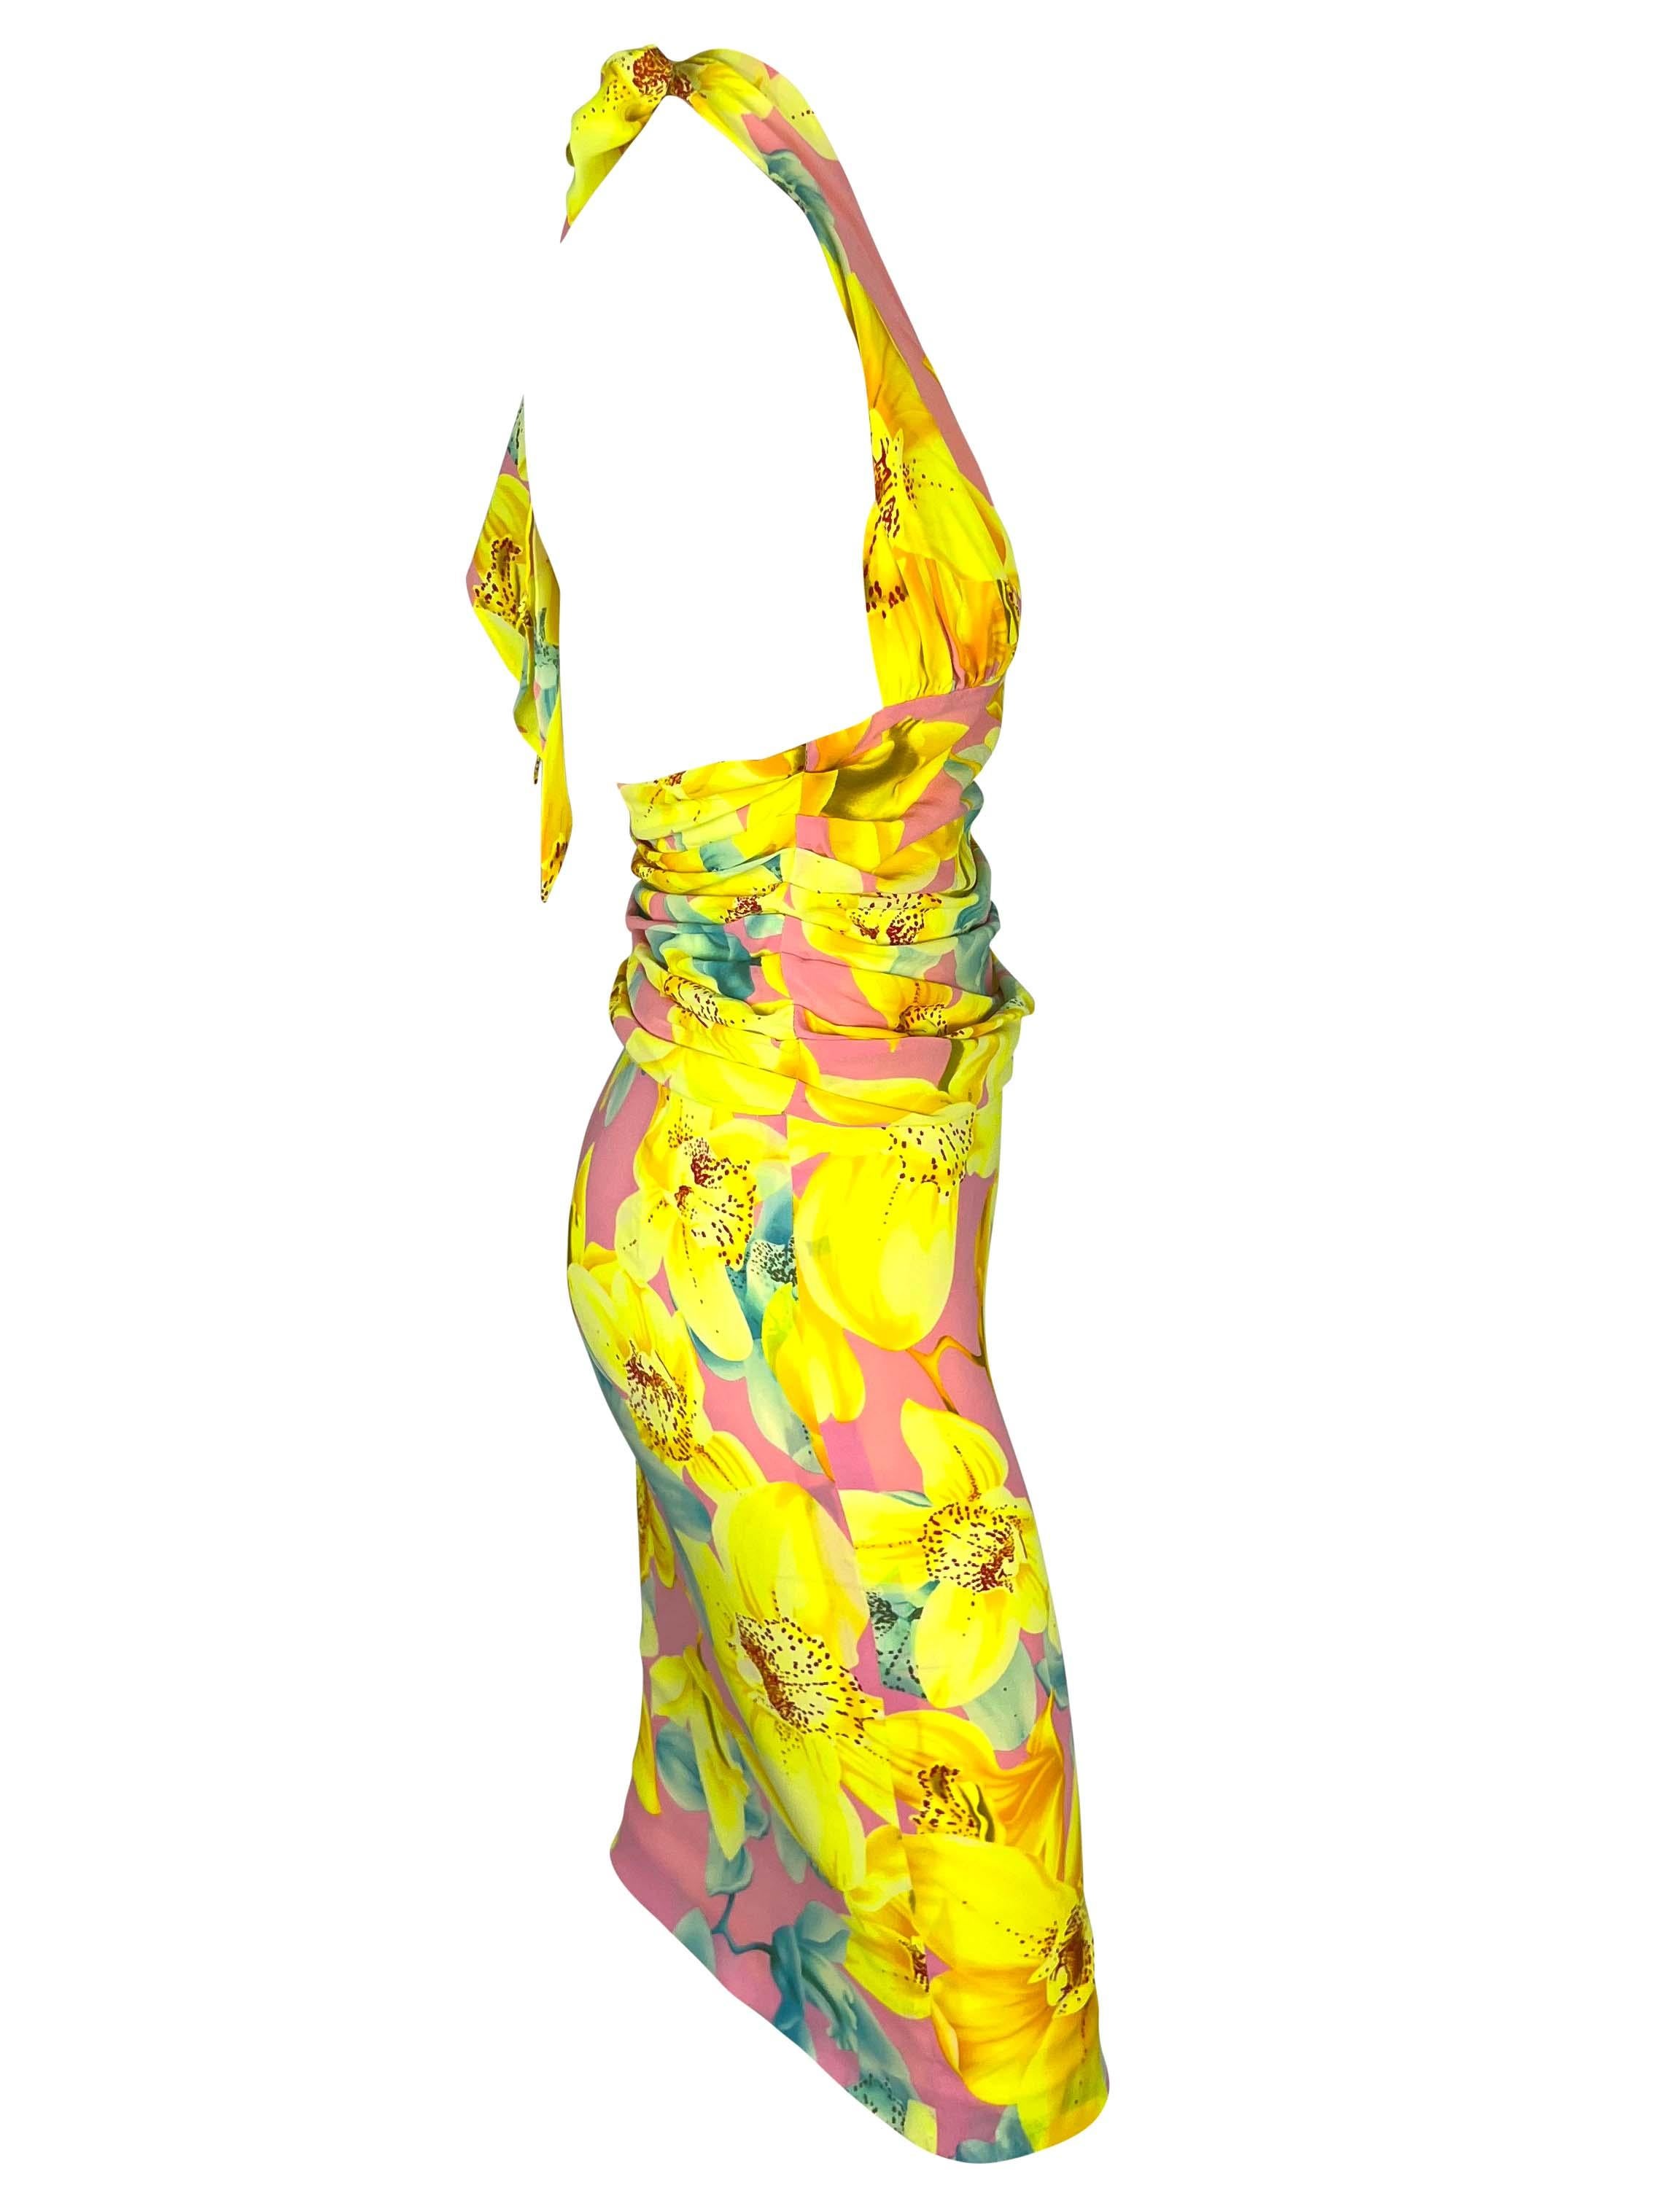 S/S 2004 Versace by Donatella Runway Neon Pink Floral Halter Top Skirt Set For Sale 1